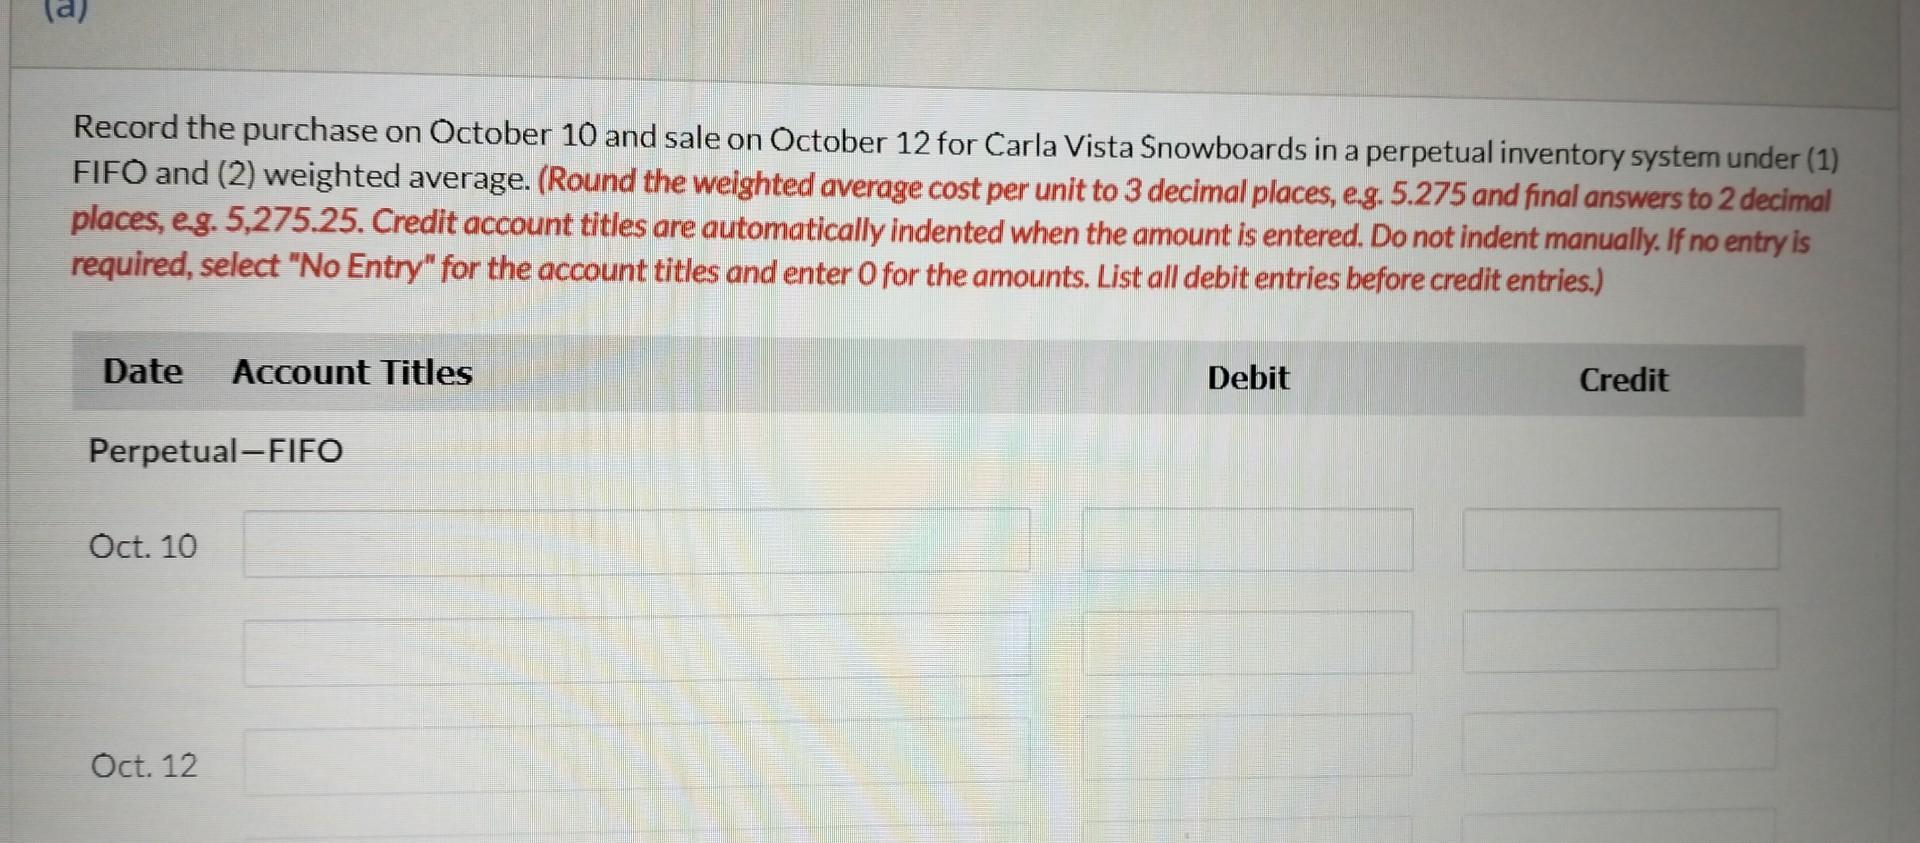 Record the purchase on October 10 and sale on October 12 for Carla Vista Snowboards in a perpetual inventory system under (1)